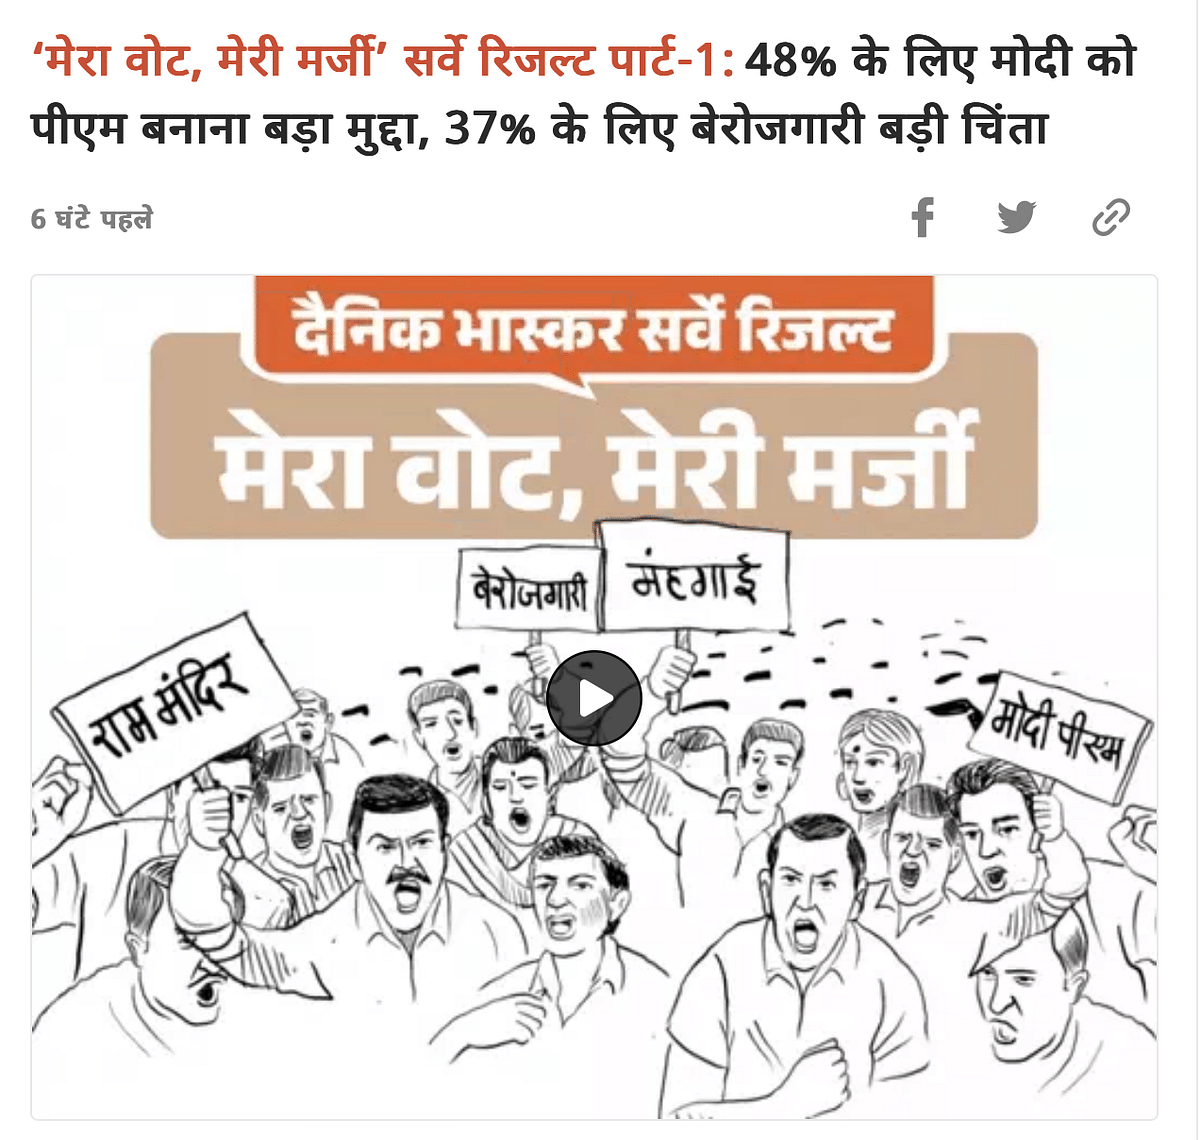 Did Dainik Bhaskar Predict a Lead of INDIA Bloc in 10 States? No, the newspaper called it 'fake news'.